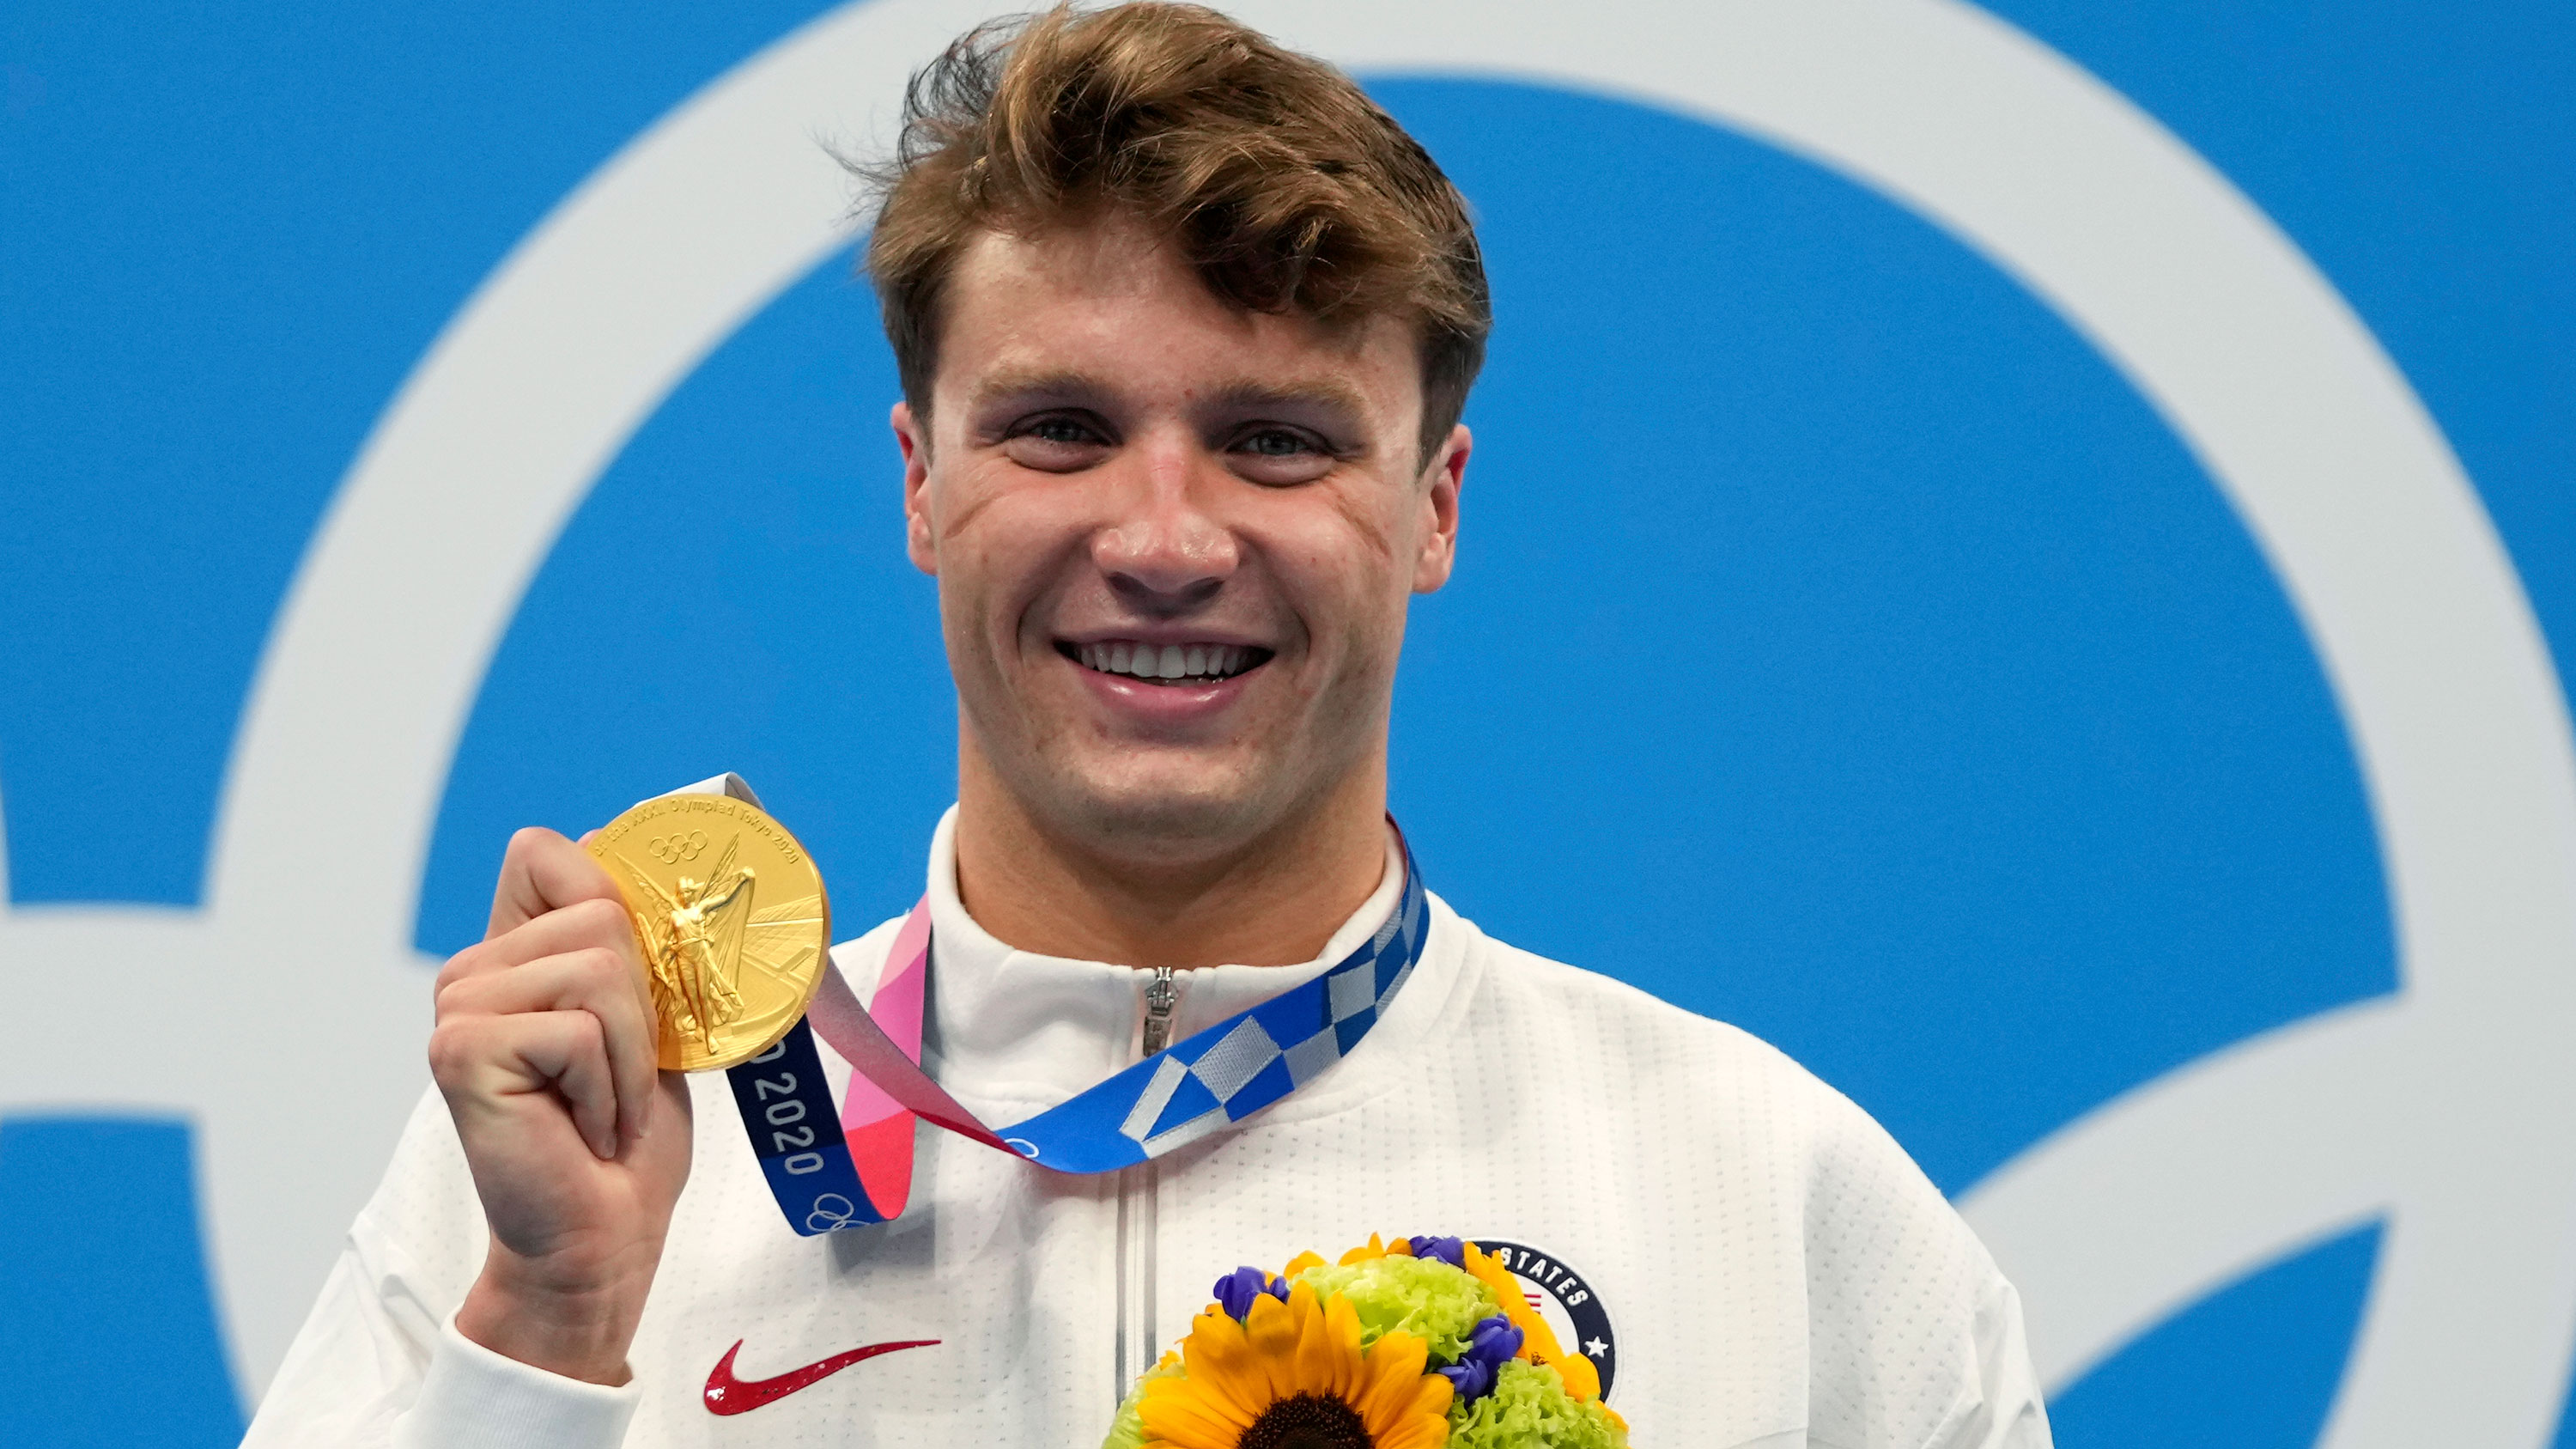 The United States' Robert Finke poses with his gold medal for the 800-meter freestyle on July 29.